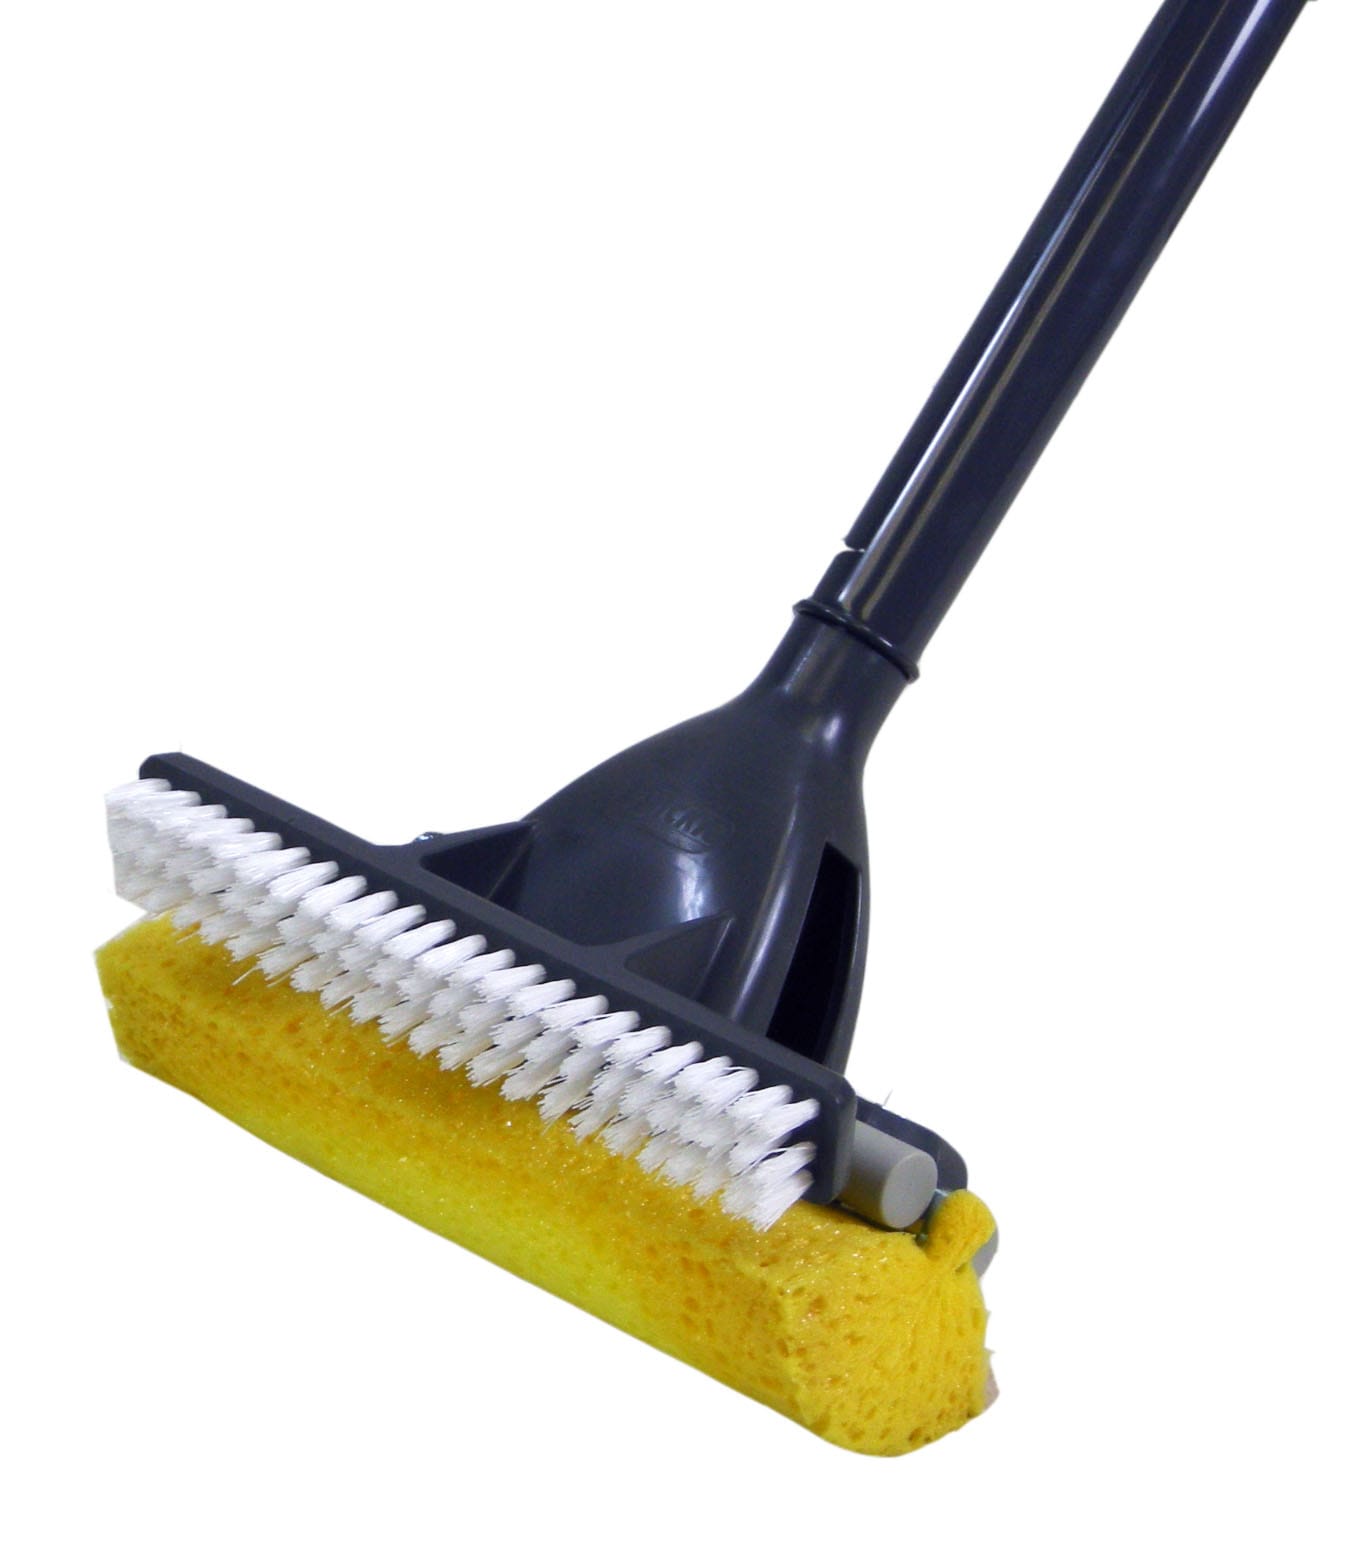 PVA Mop Double Roller Sponge Foam Rubber Mop and Extra Replacement Head